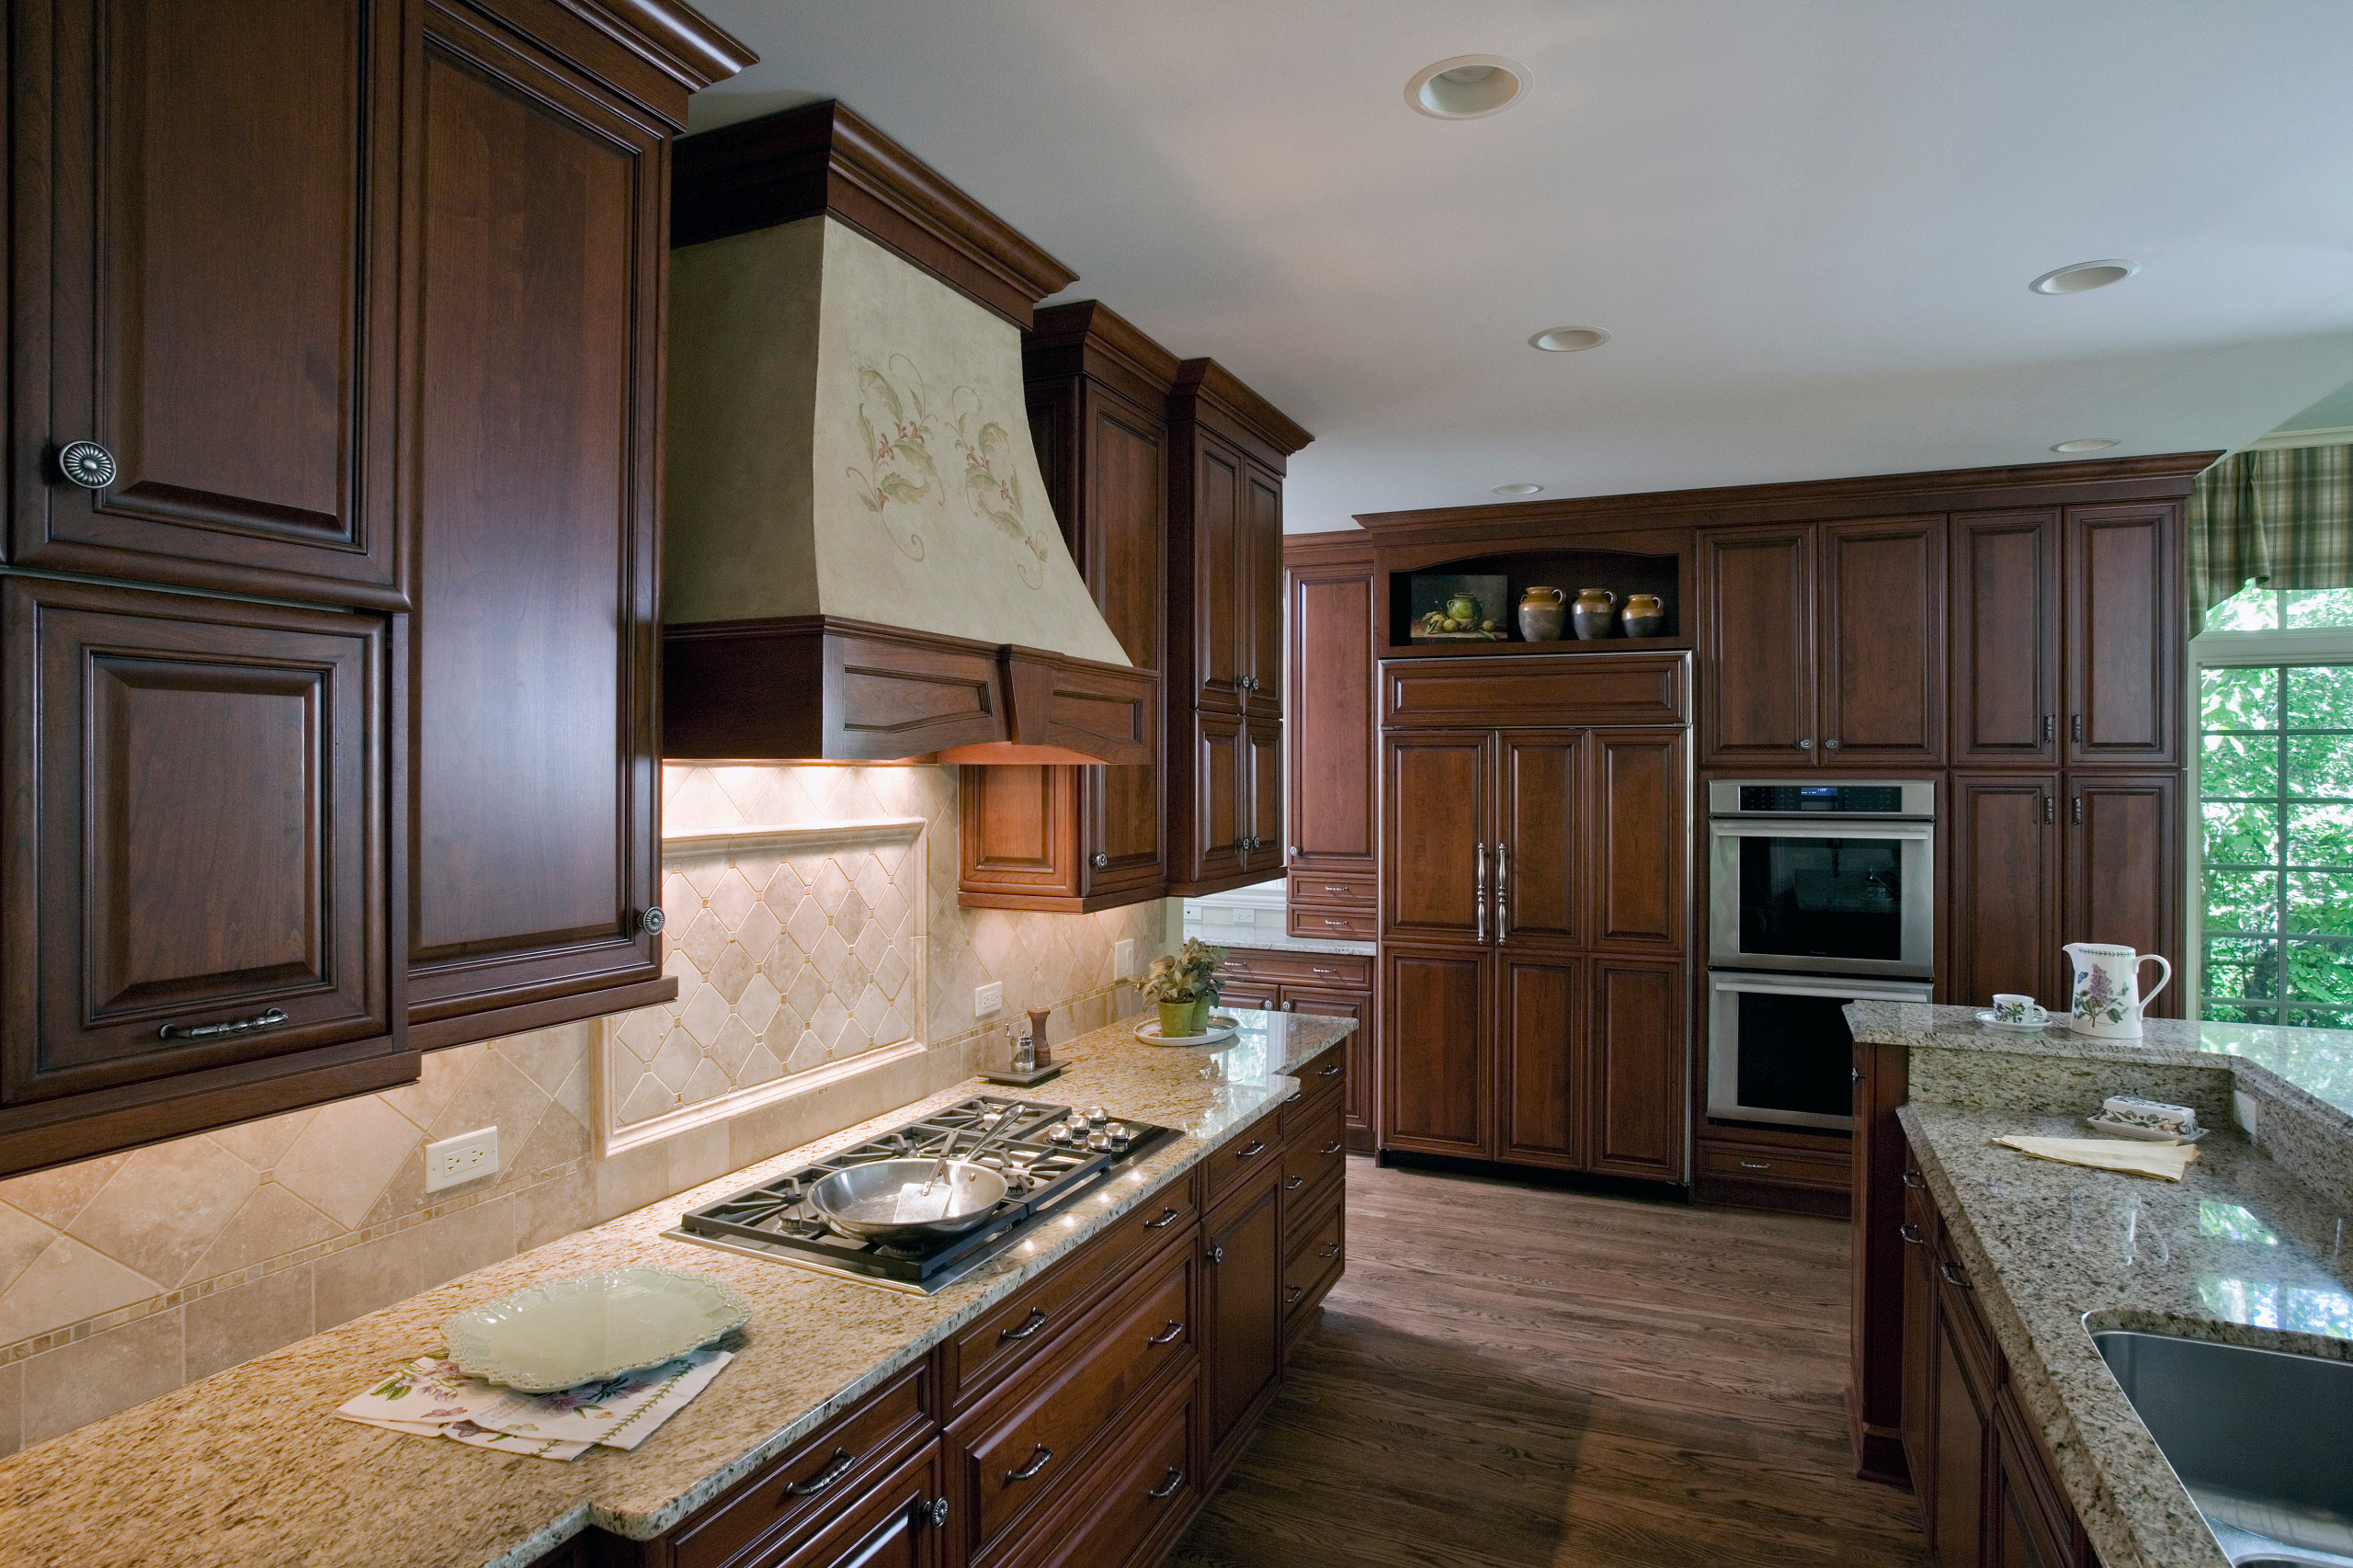 Brookhaven Cherry Cabinet Kitchen With Tumbled Stone Backsplash Traditional Kitchen Chicago By Orren Pickell Building Group Houzz